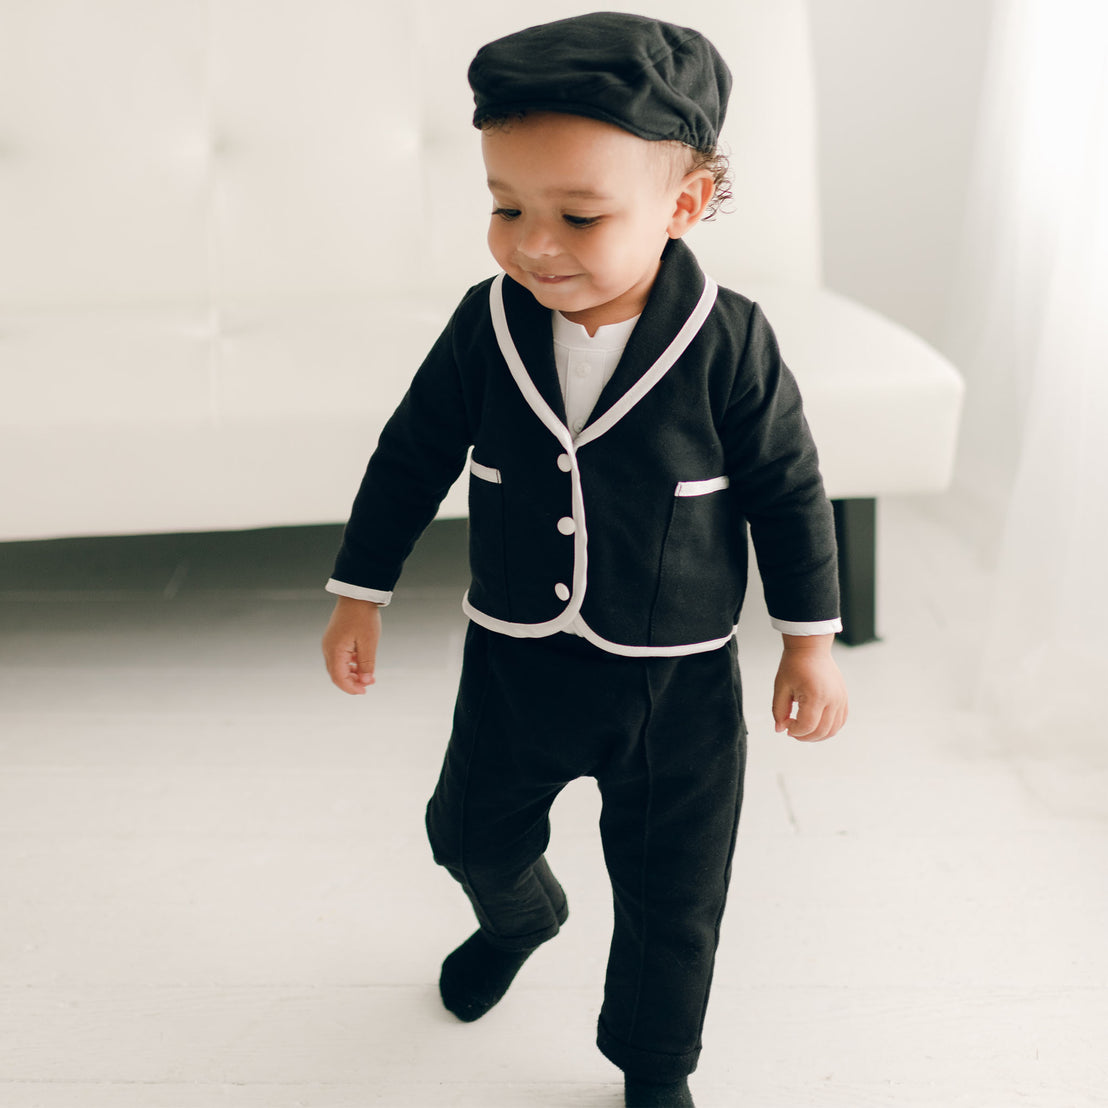 Baby boy standing up and wearing the black James 3-Piece Suit (and matching Newsboy Cap).